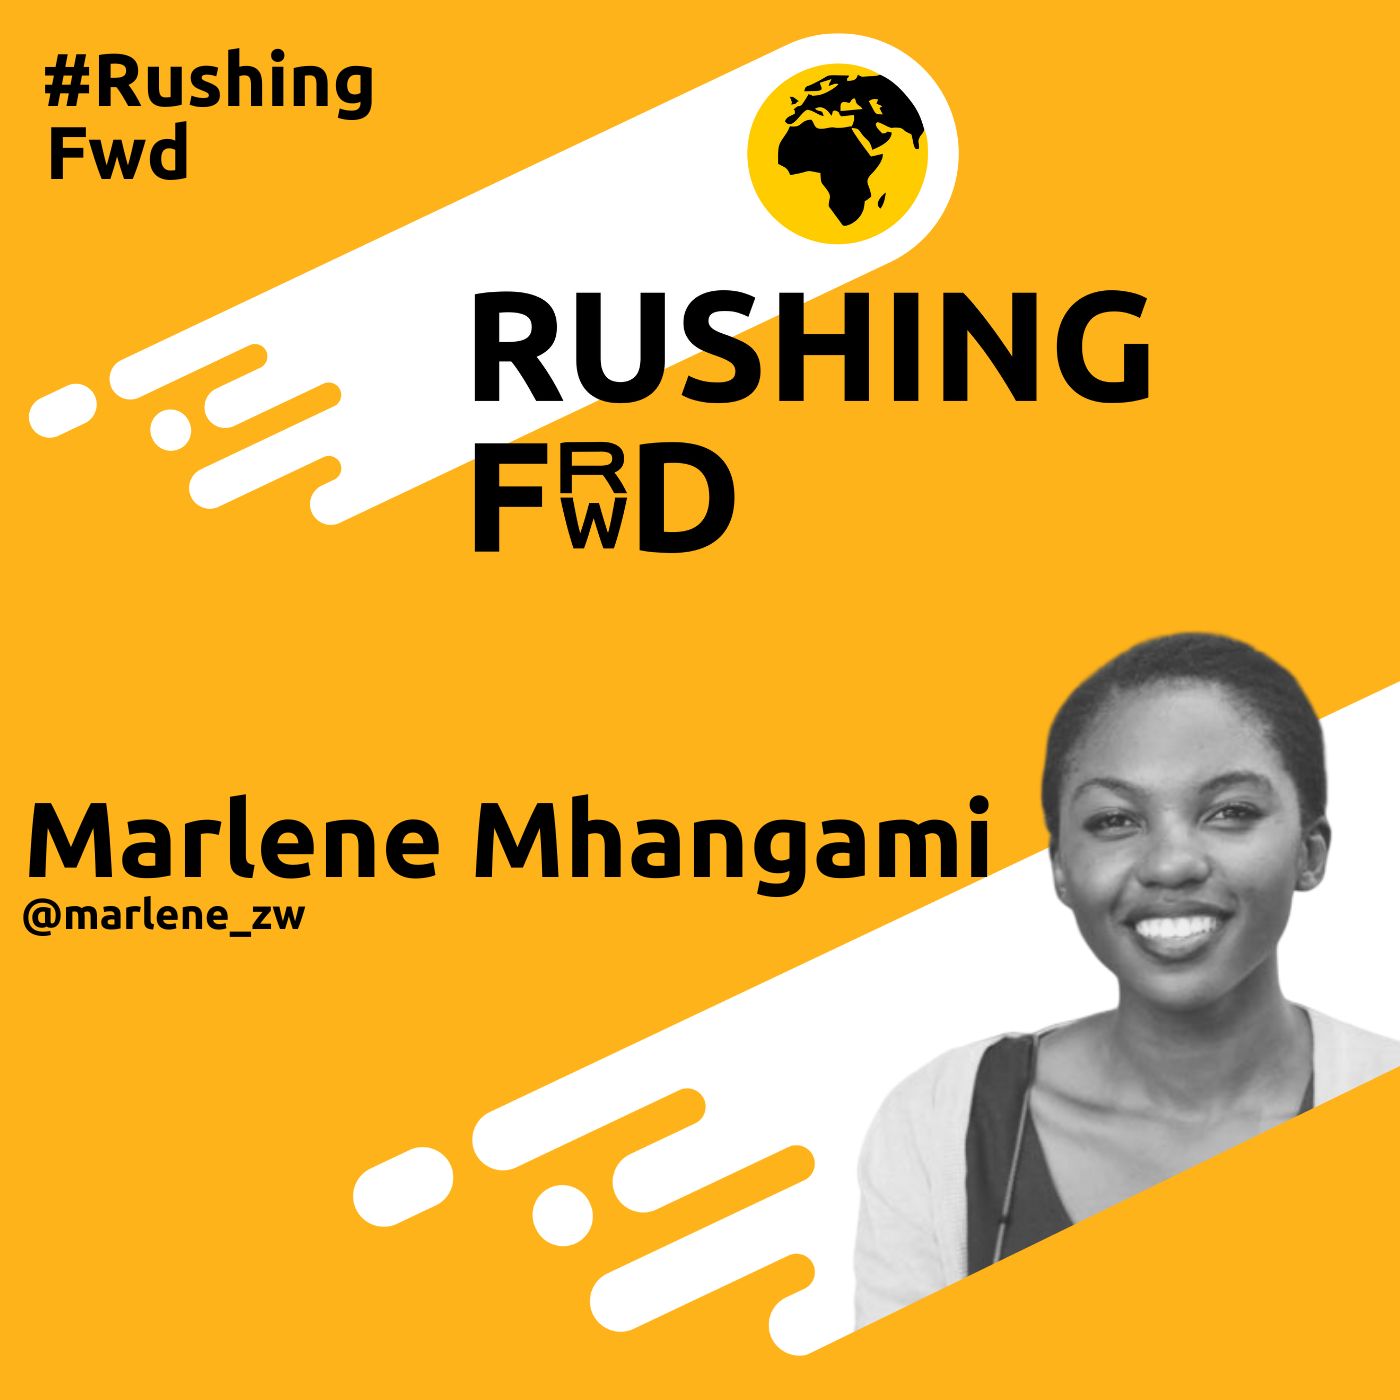 Marlene Mhangami: Communities, Conferences and Living in Africa